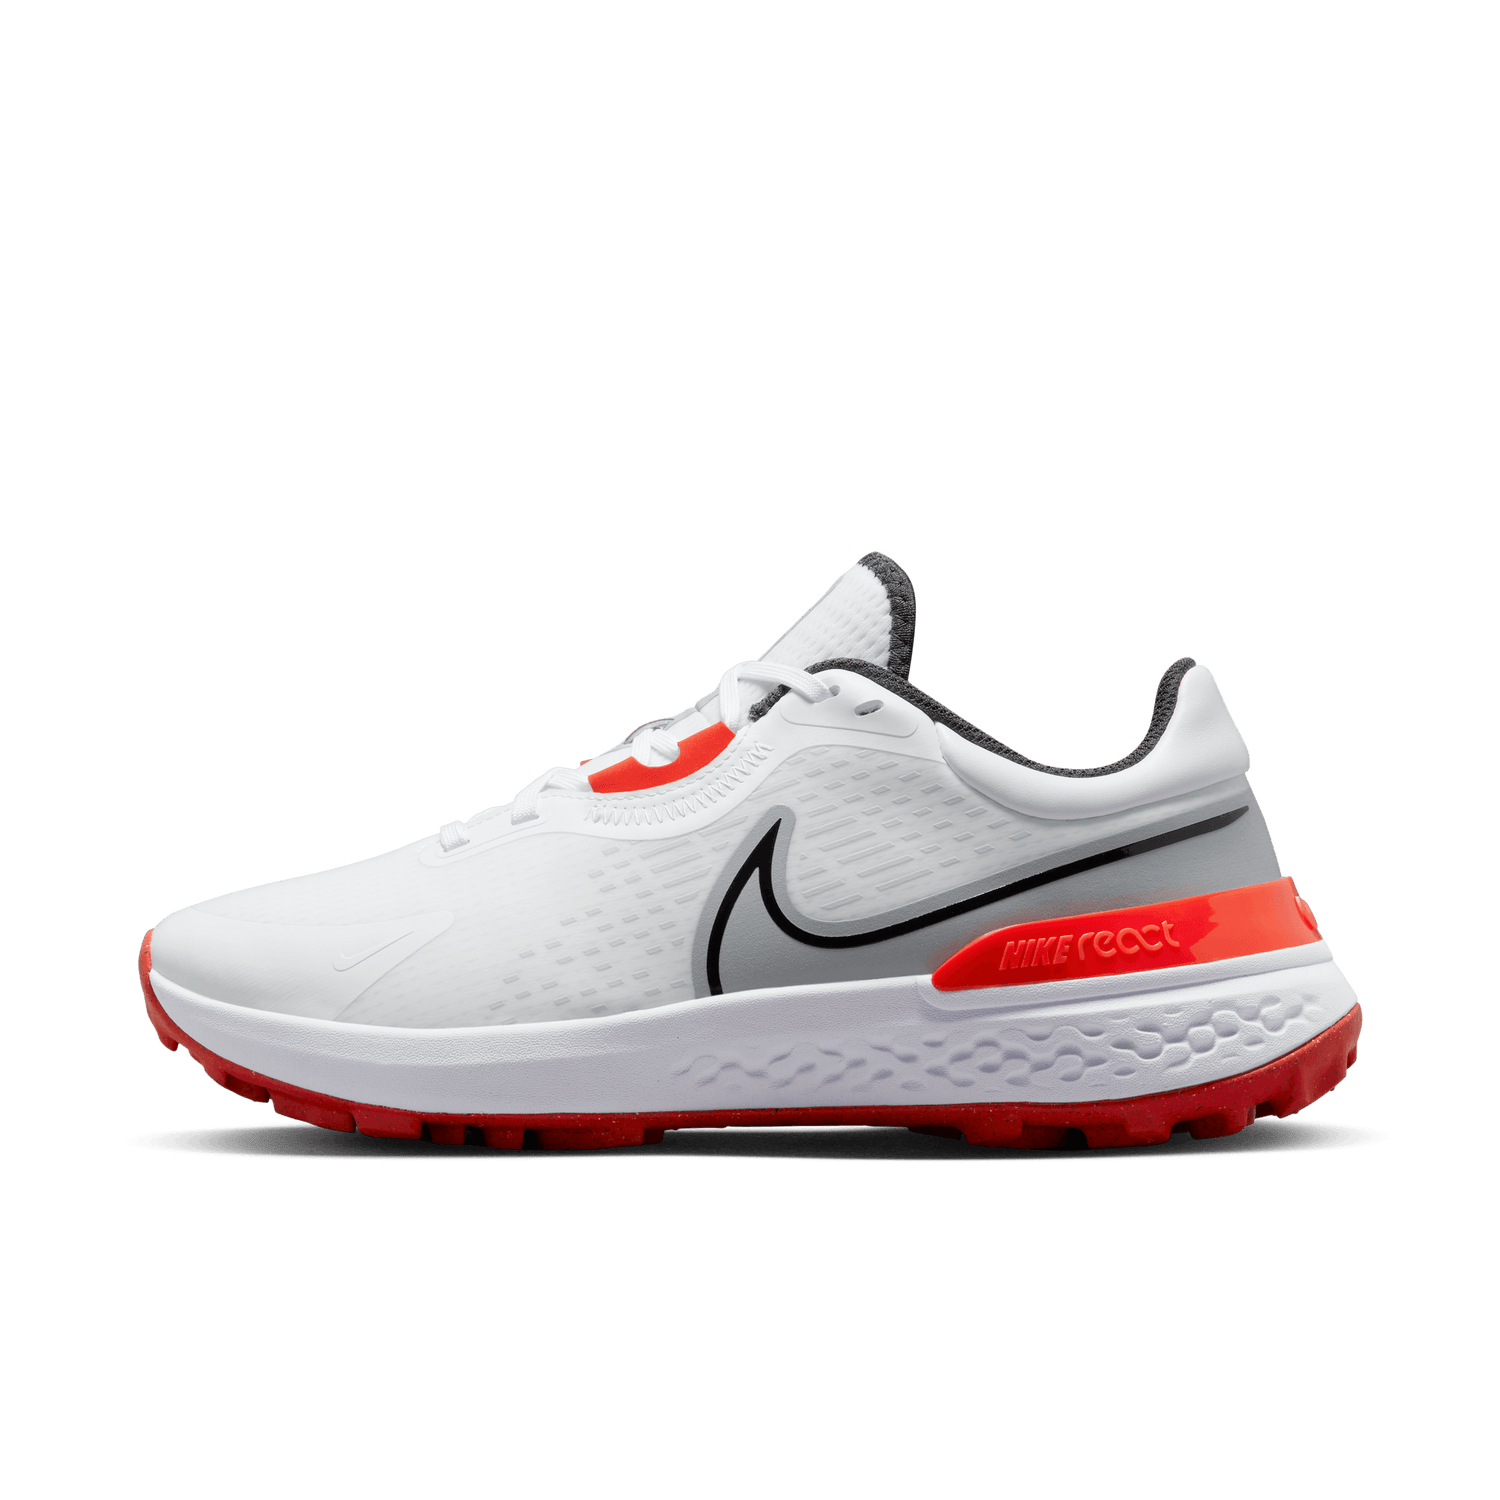 Nike Golf Infinity Pro 2 Spikeless Golf Shoes DJ5593 White/Black/Grey Wolf/Picante Red 106 8 